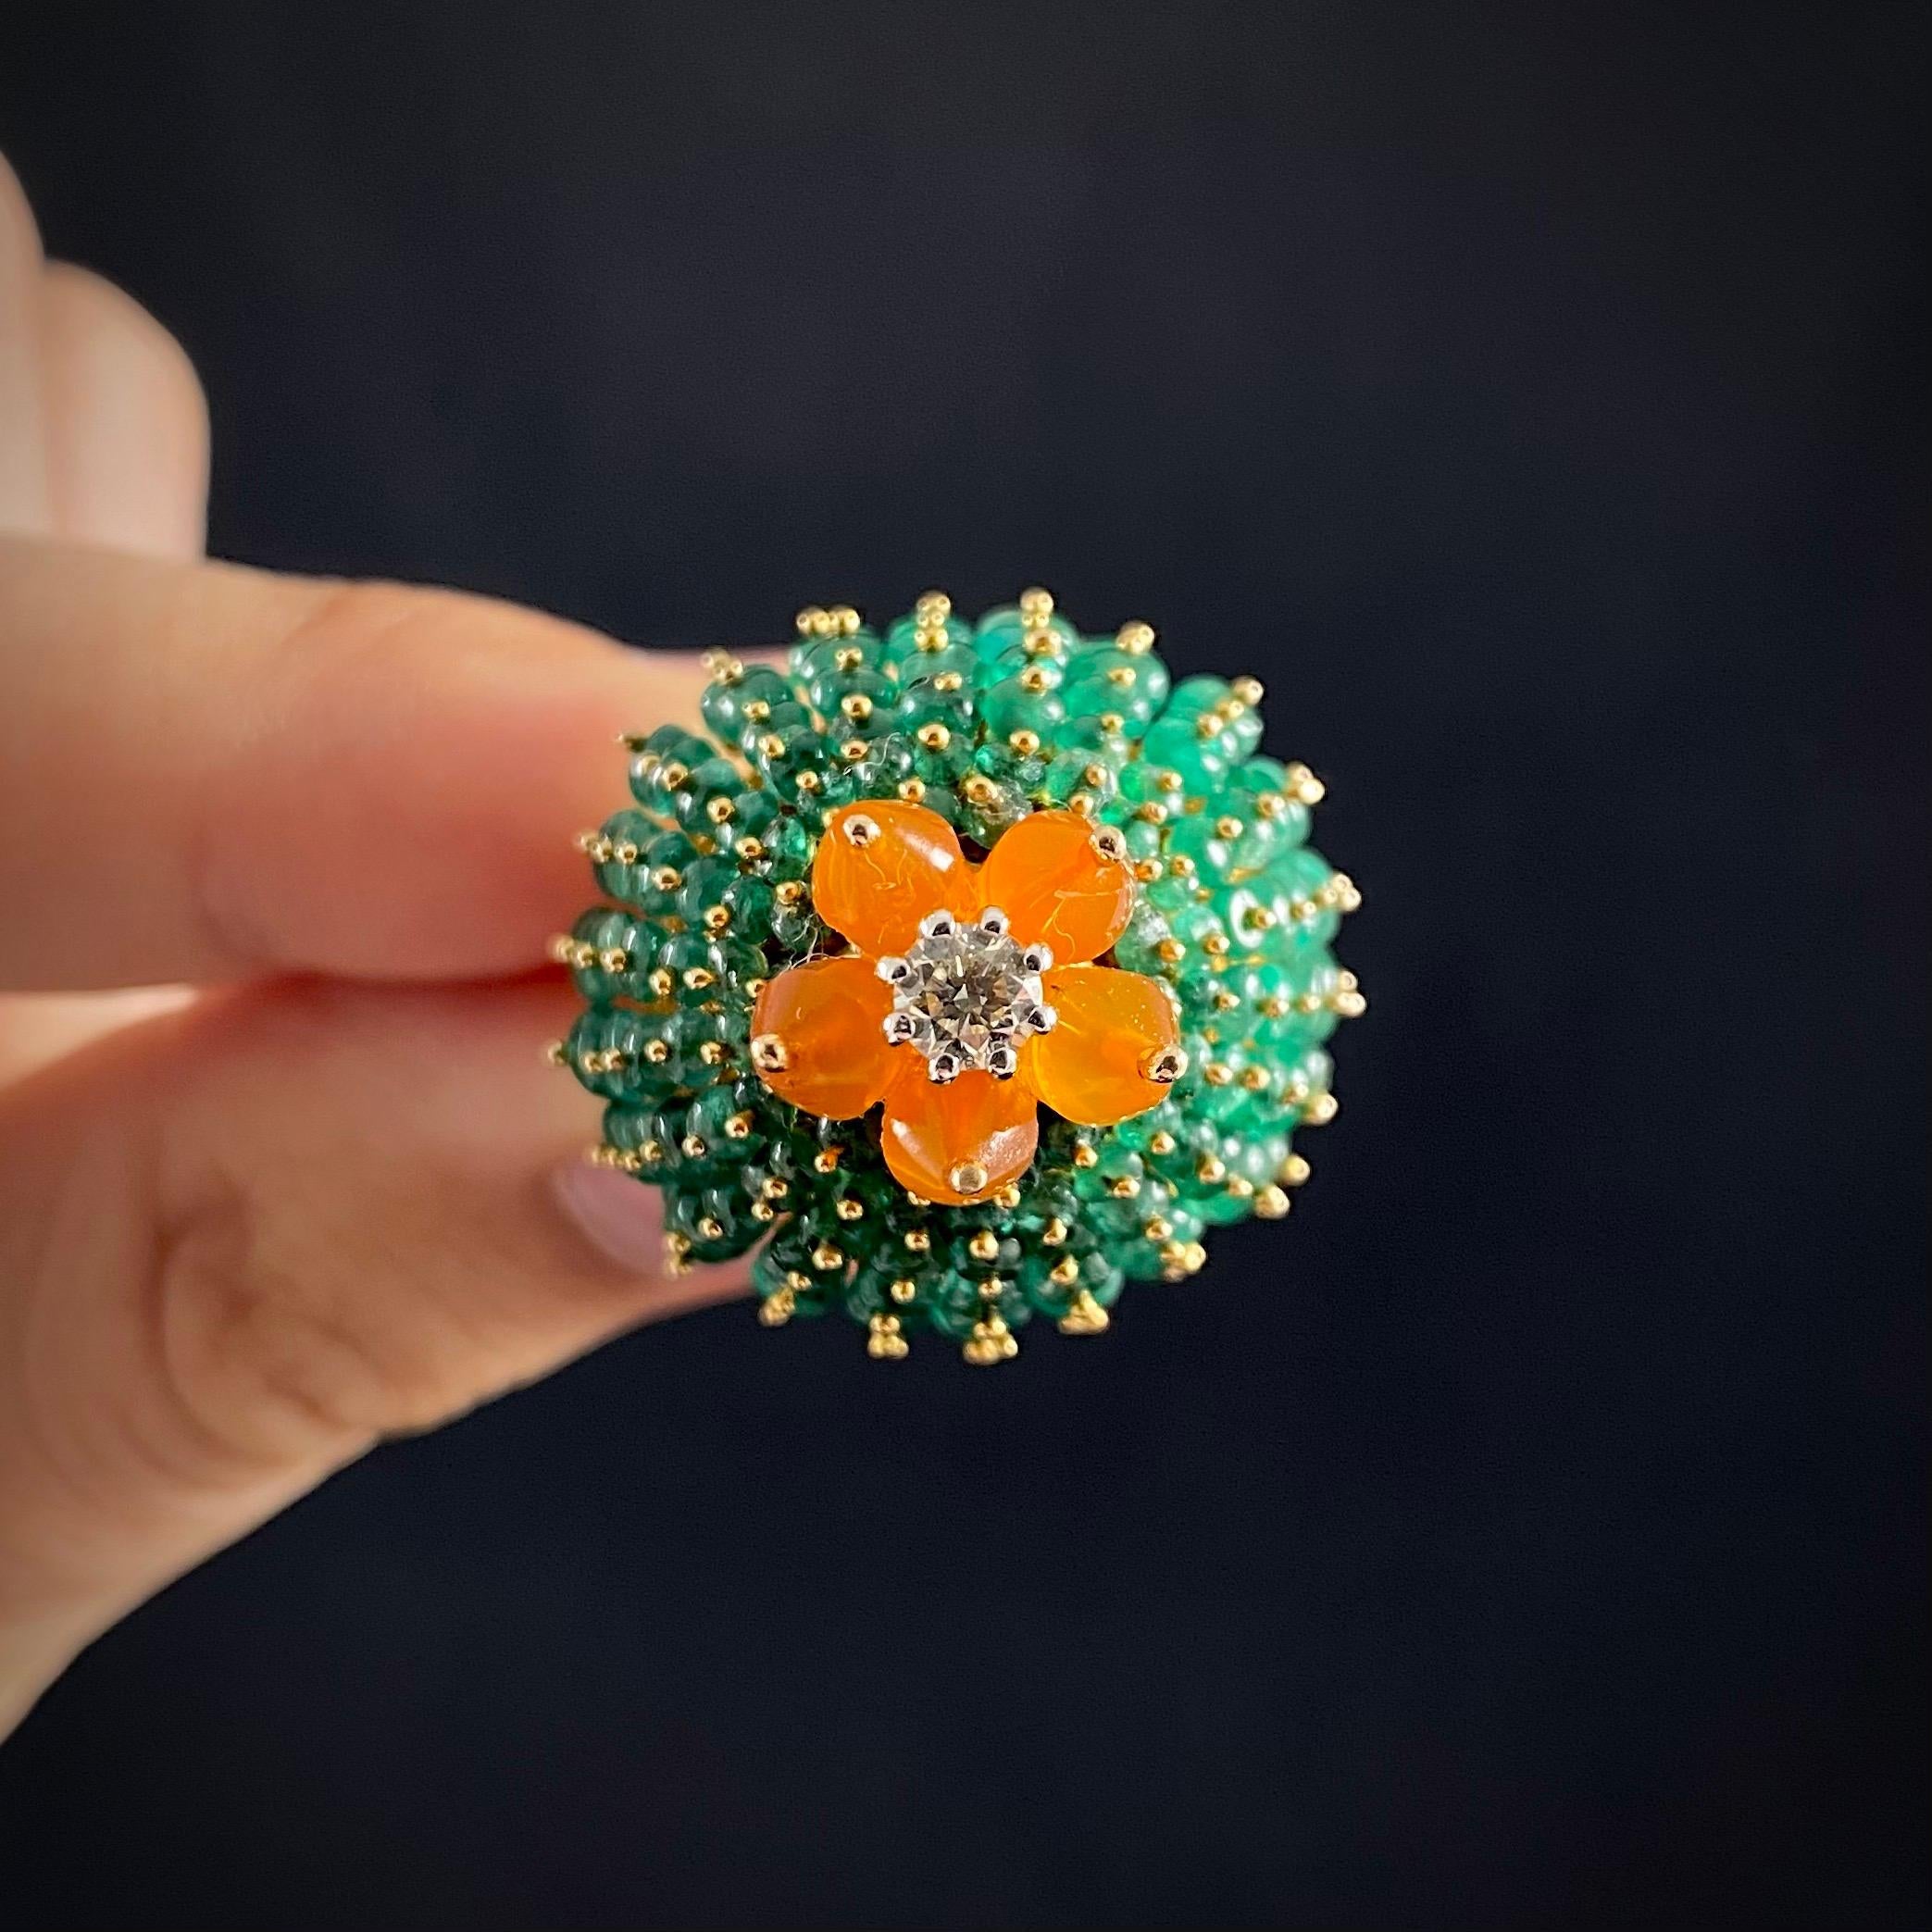 Modern Vintage Emerald Fire Opal Diamond Bombe Cactus Cocktail Ring Yellow Gold 1990s